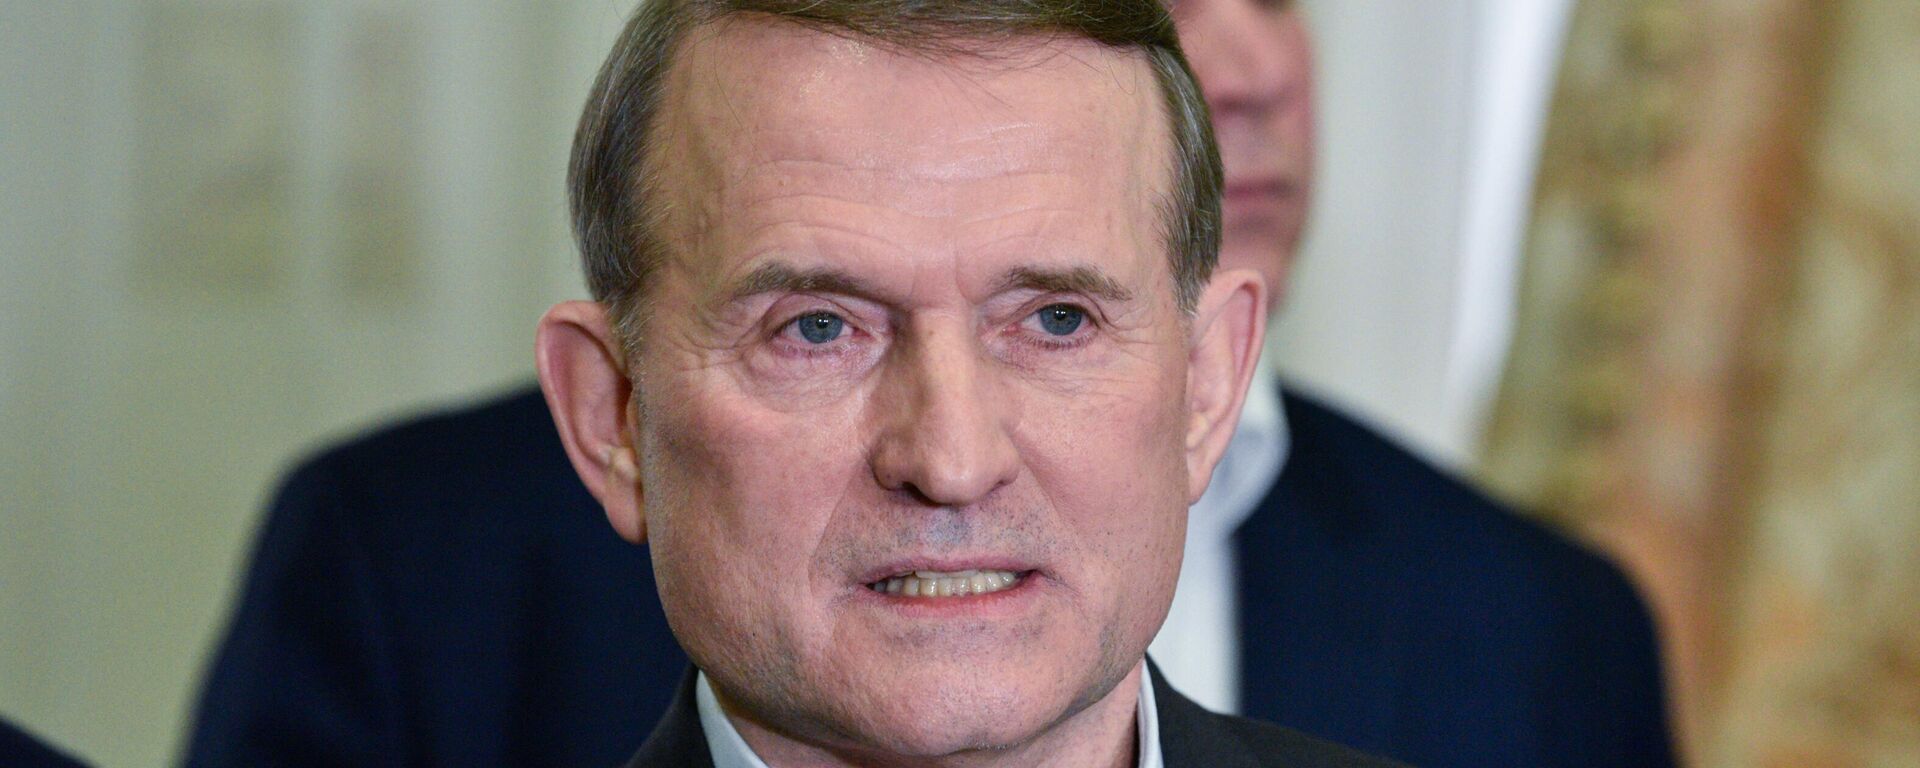 Chairman of the political council of the Opposition Platform - For Life party Viktor Medvedchuk after a meeting of the Kiev Court of Appeal. - Sputnik International, 1920, 12.04.2022